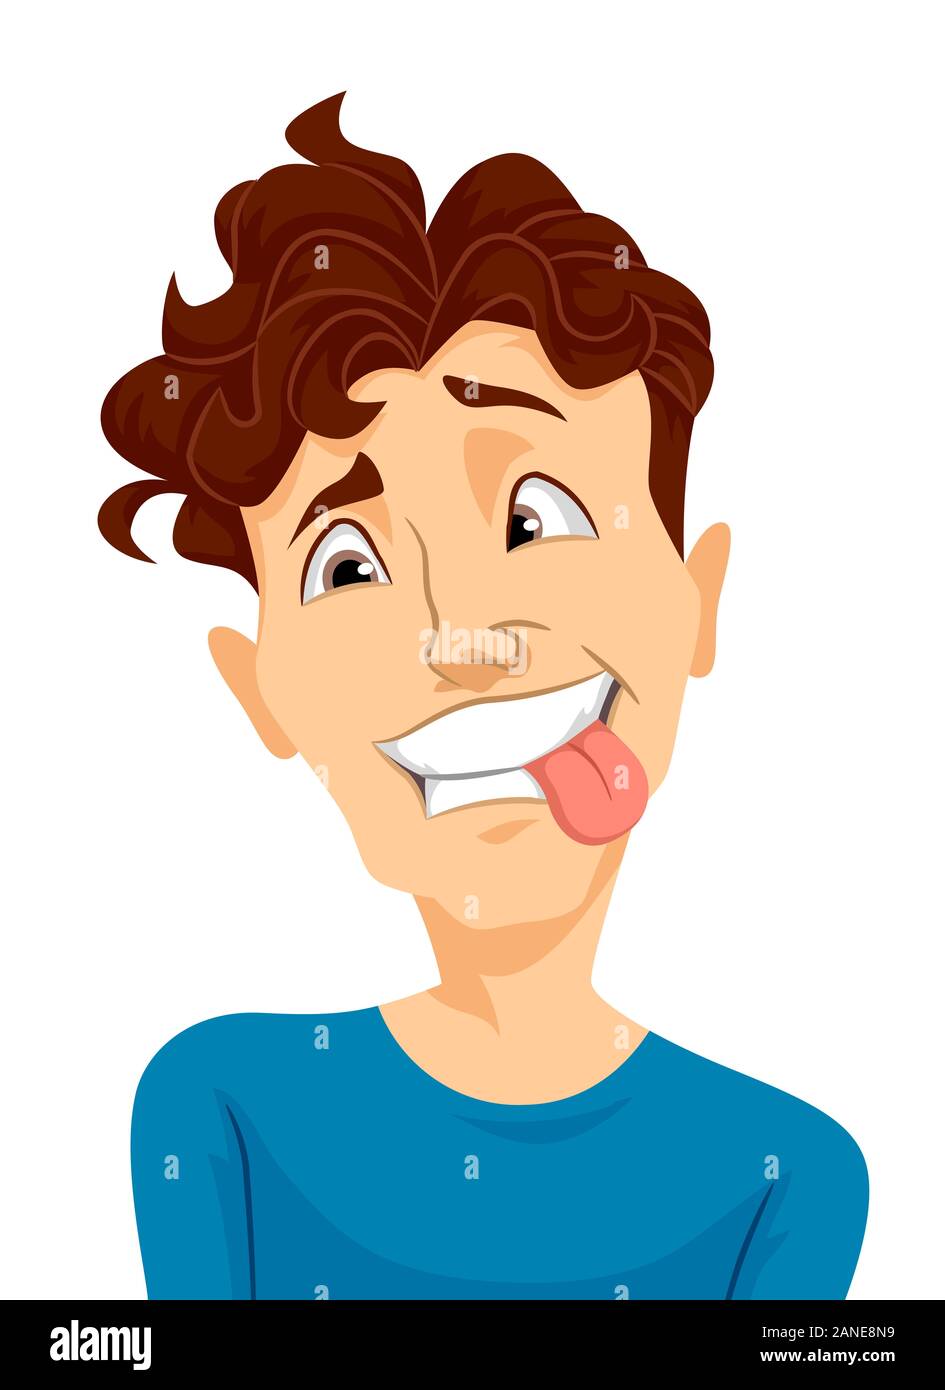 Illustration of a Man Acting like a Crazy Person with His Tongue Out,  Raised Eyebrow and Crossed Eyes Stock Photo - Alamy